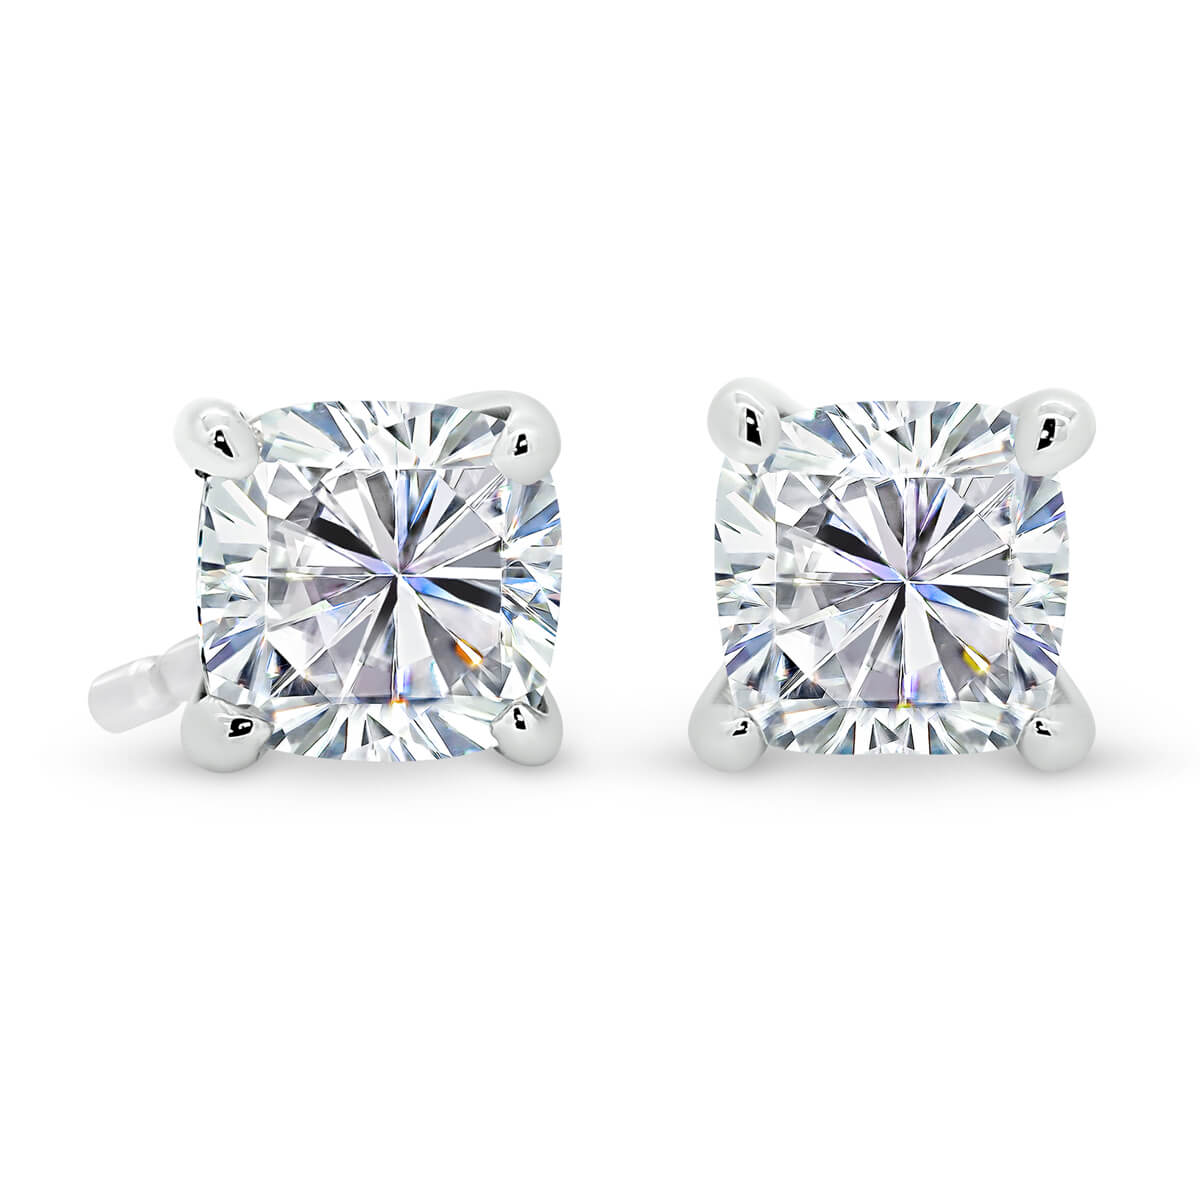 Yumi 4.0-6.0 Moissanite Earrings With Cushion Cut Solitaire Design